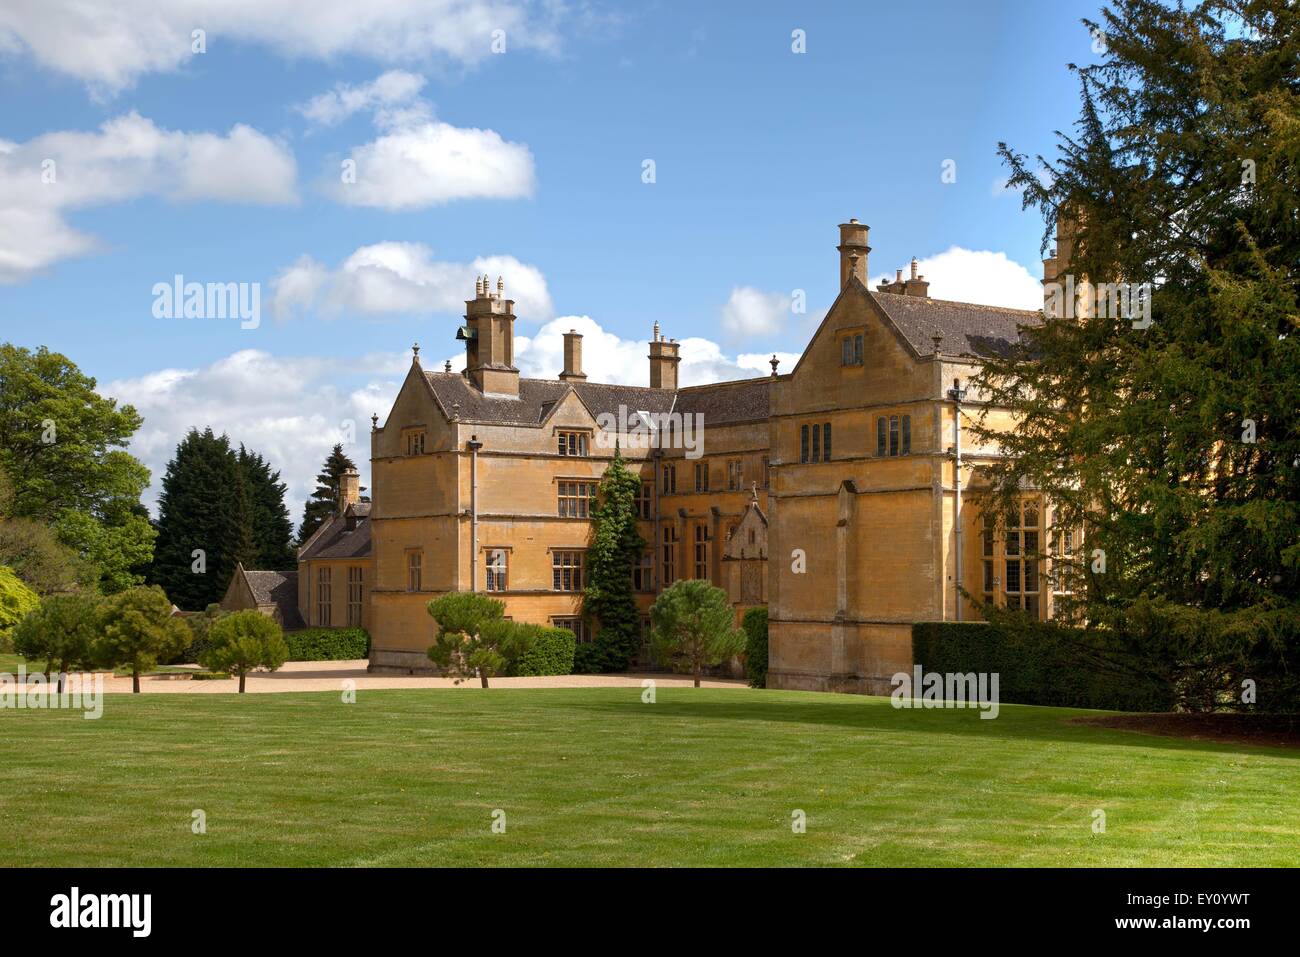 Cotswold stately home in Batsford near Moreton-in-Marsh, Gloucestershire, England. Stock Photo